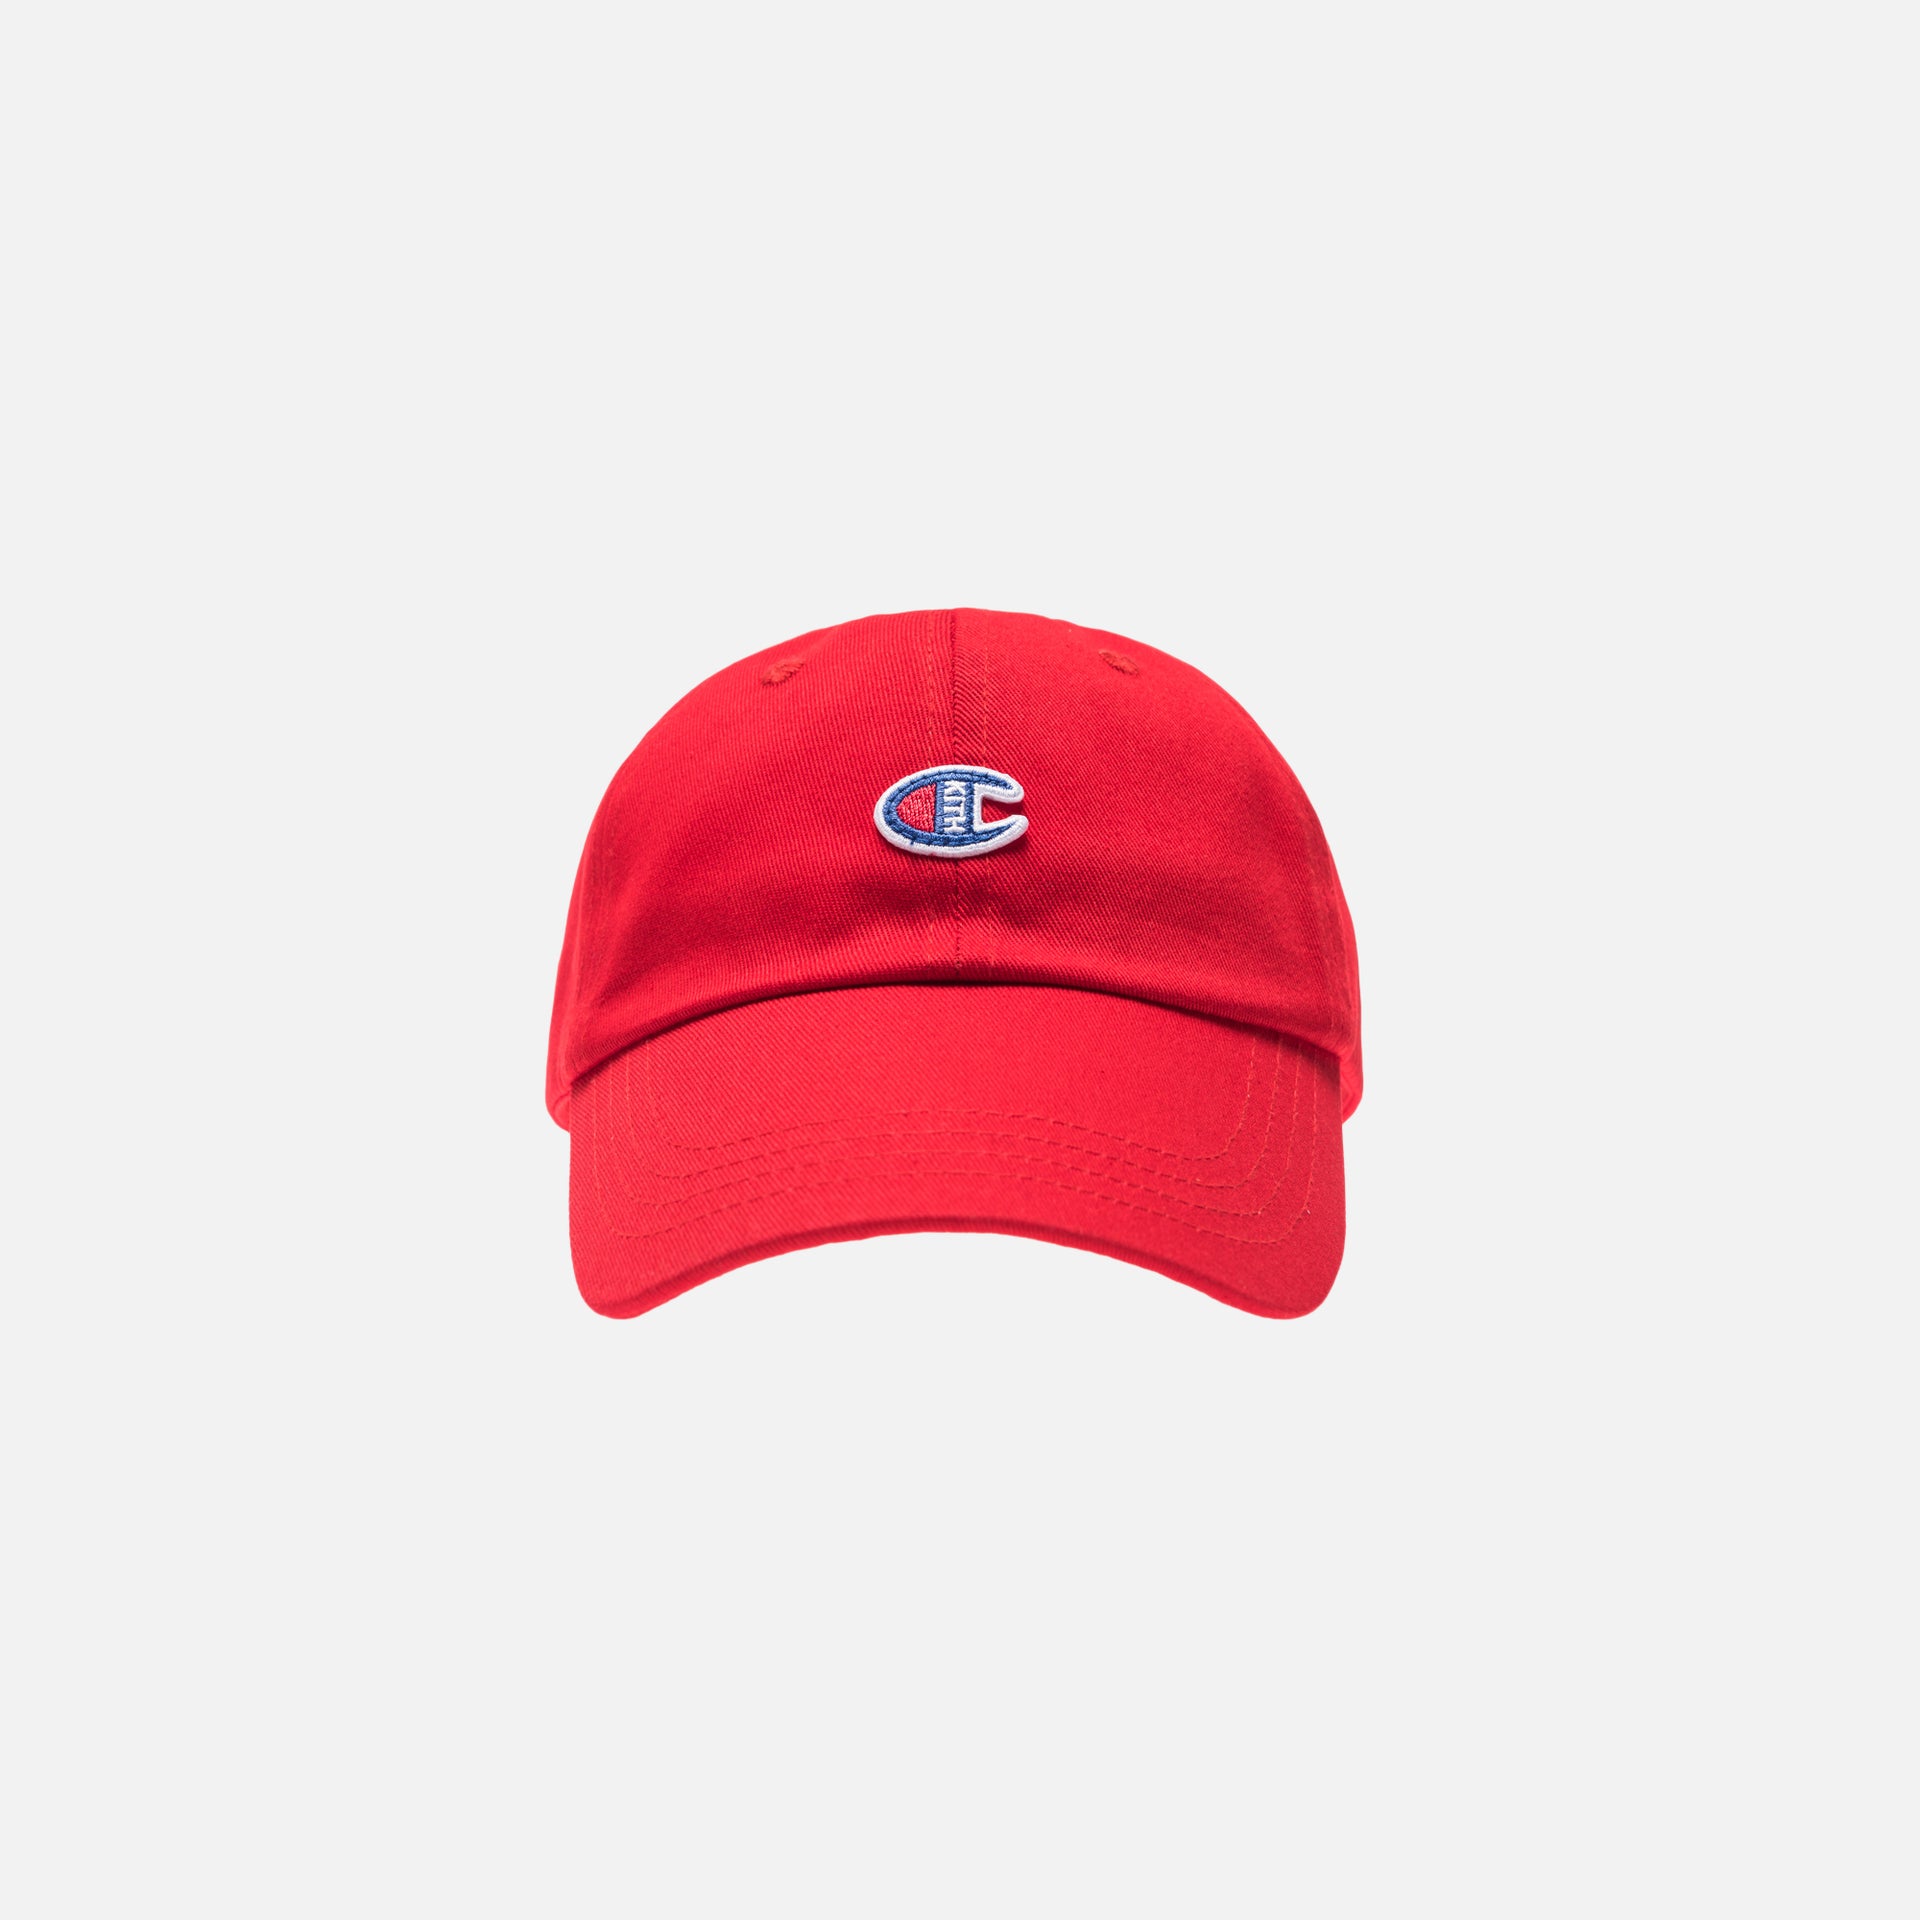 Kith x Champion C Patch Hat - Red